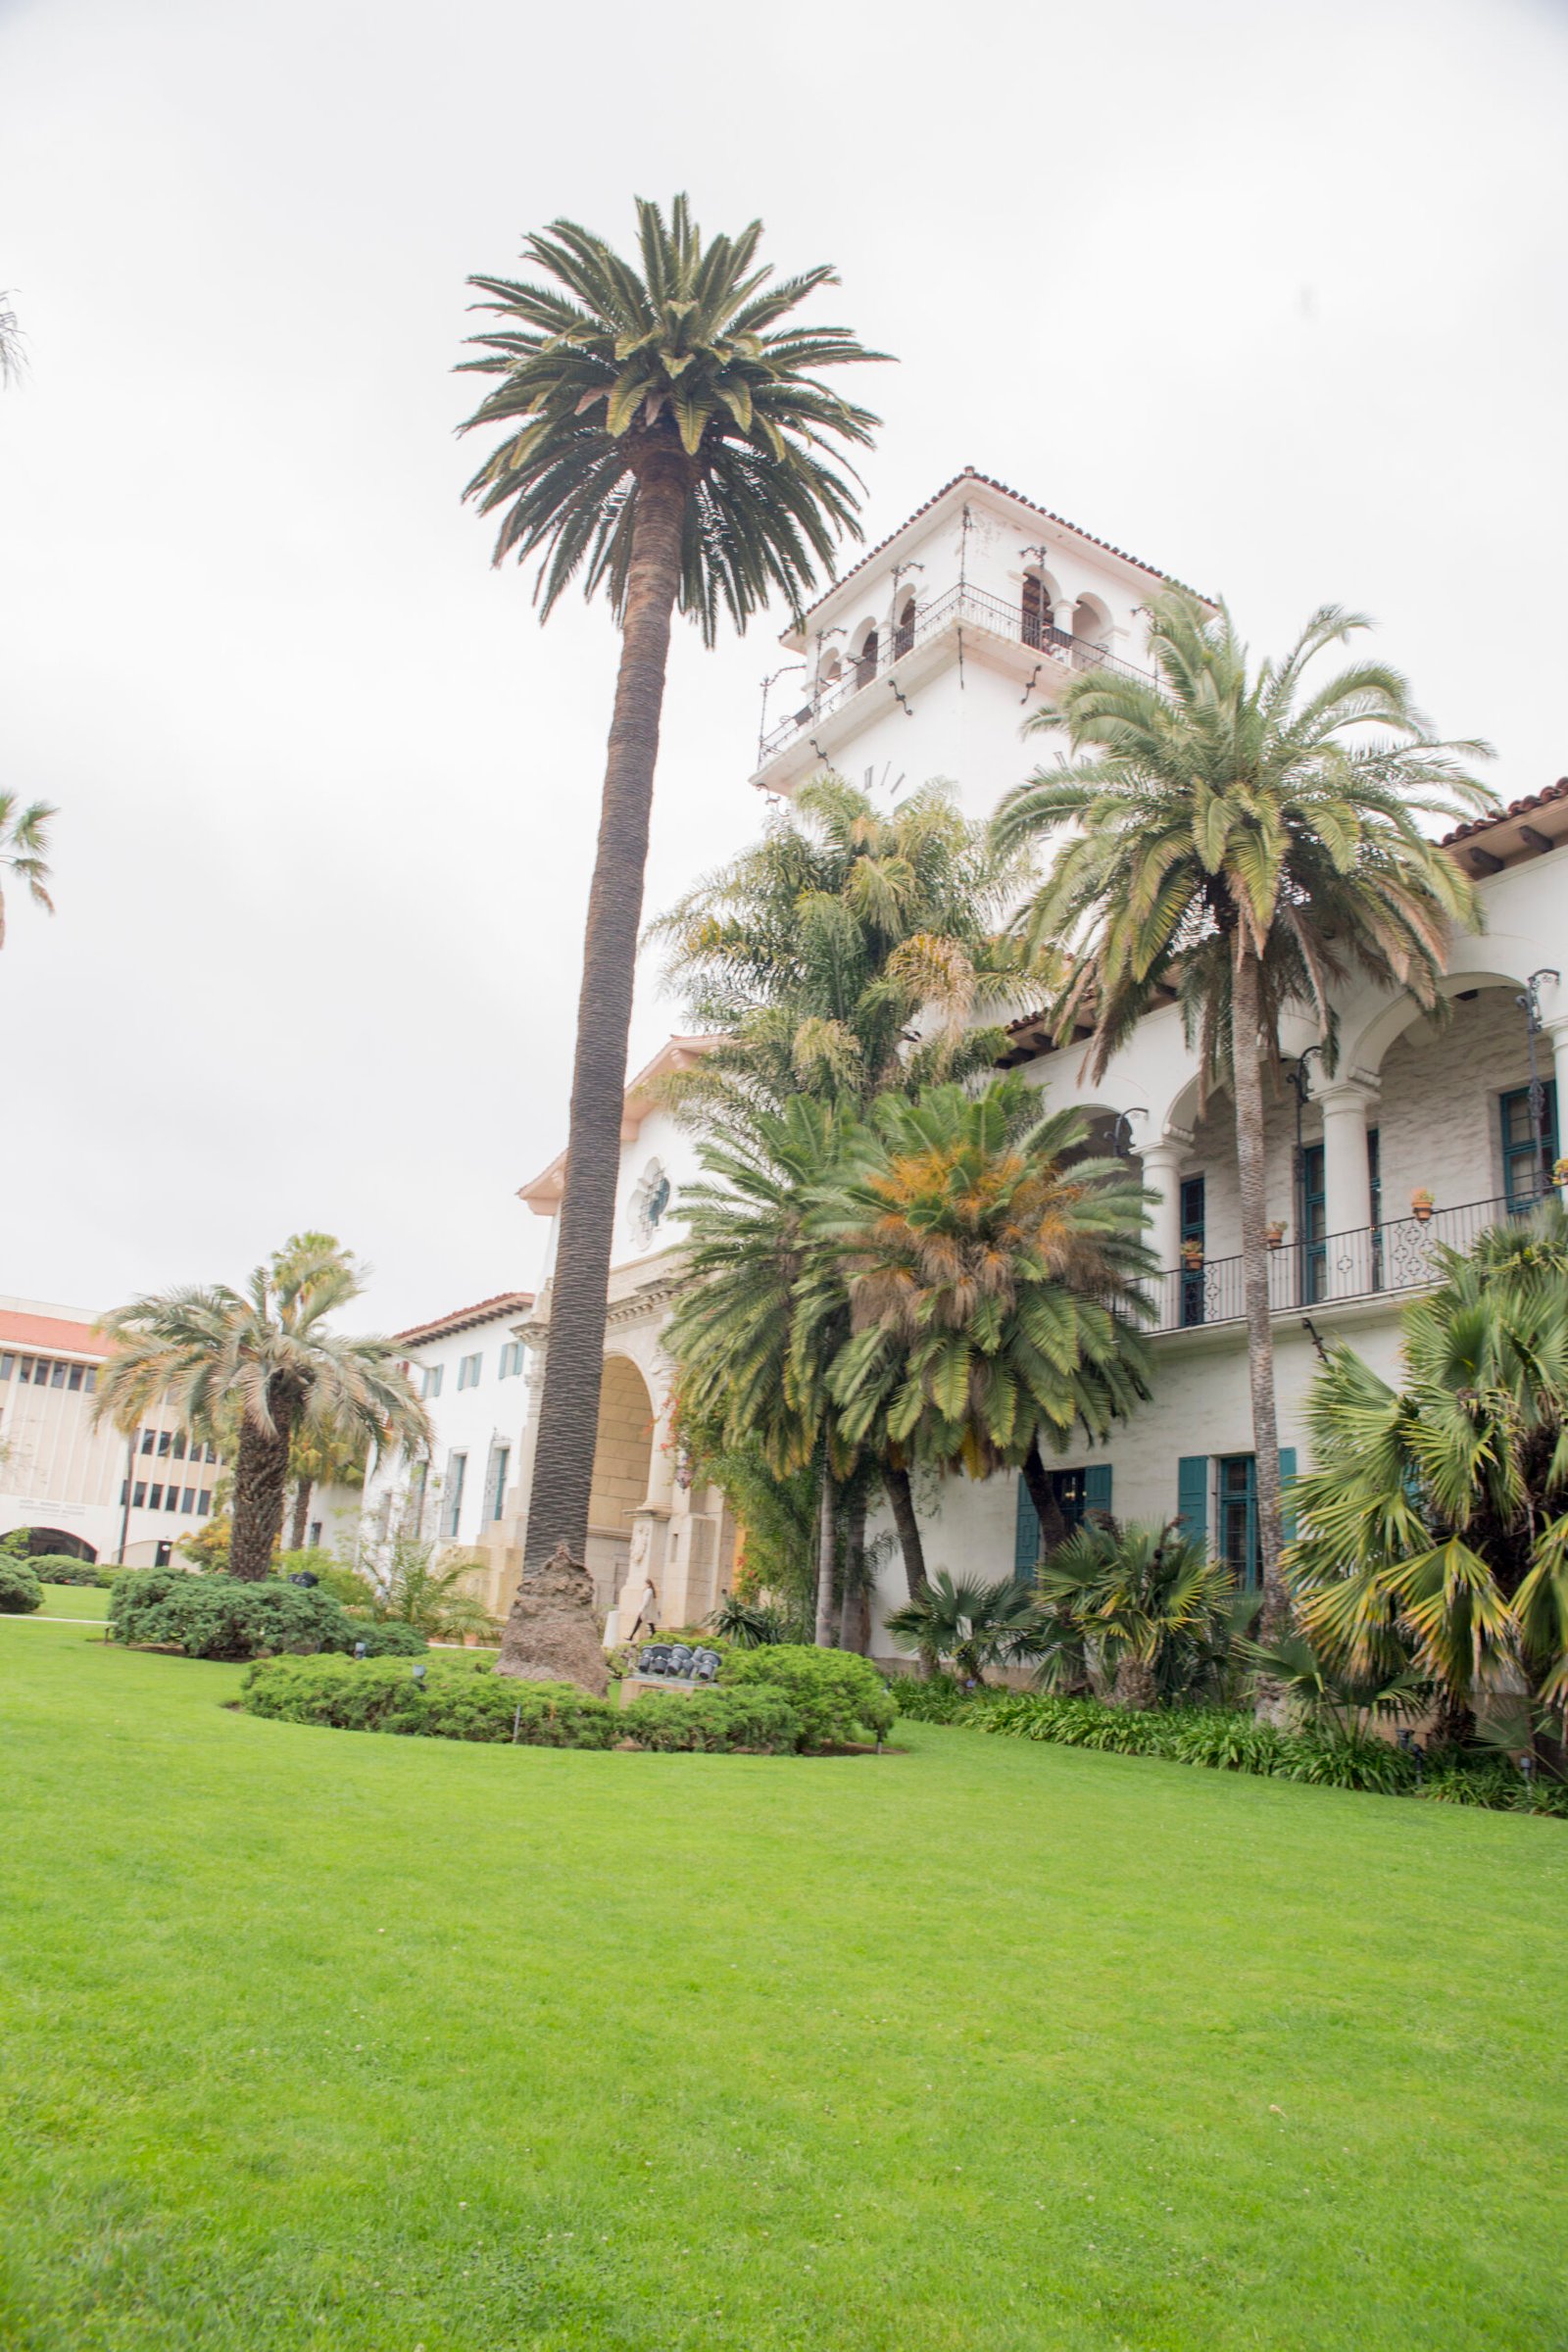 View of the side of the Santa Barbara Courthouse as seen from the Sunken Garden